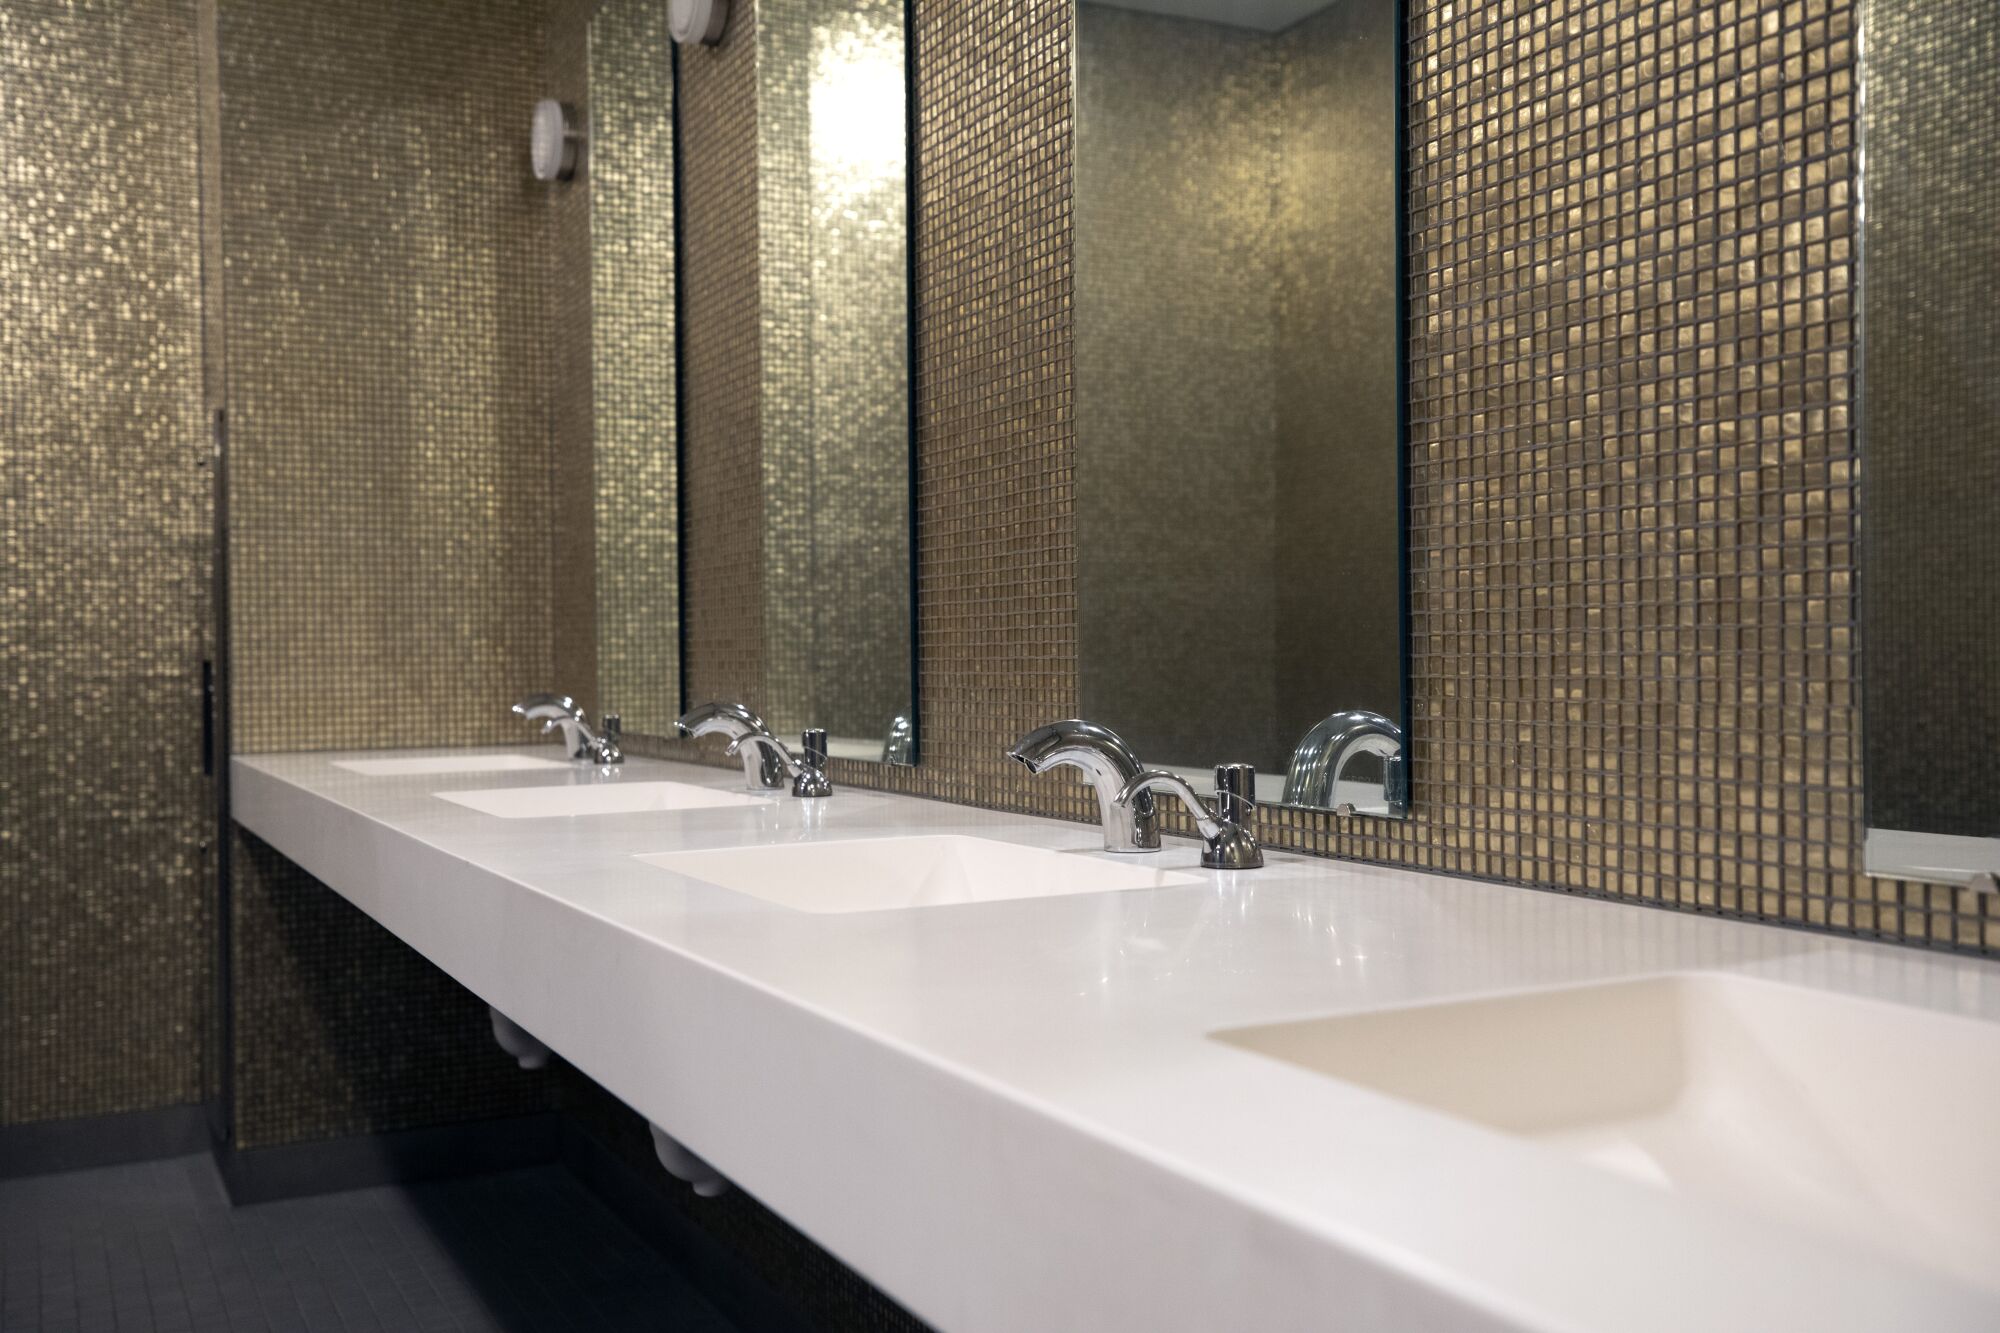 A horizontal view of a bathroom shows a row of white sinks in front of a wall of golden mosaic tile.